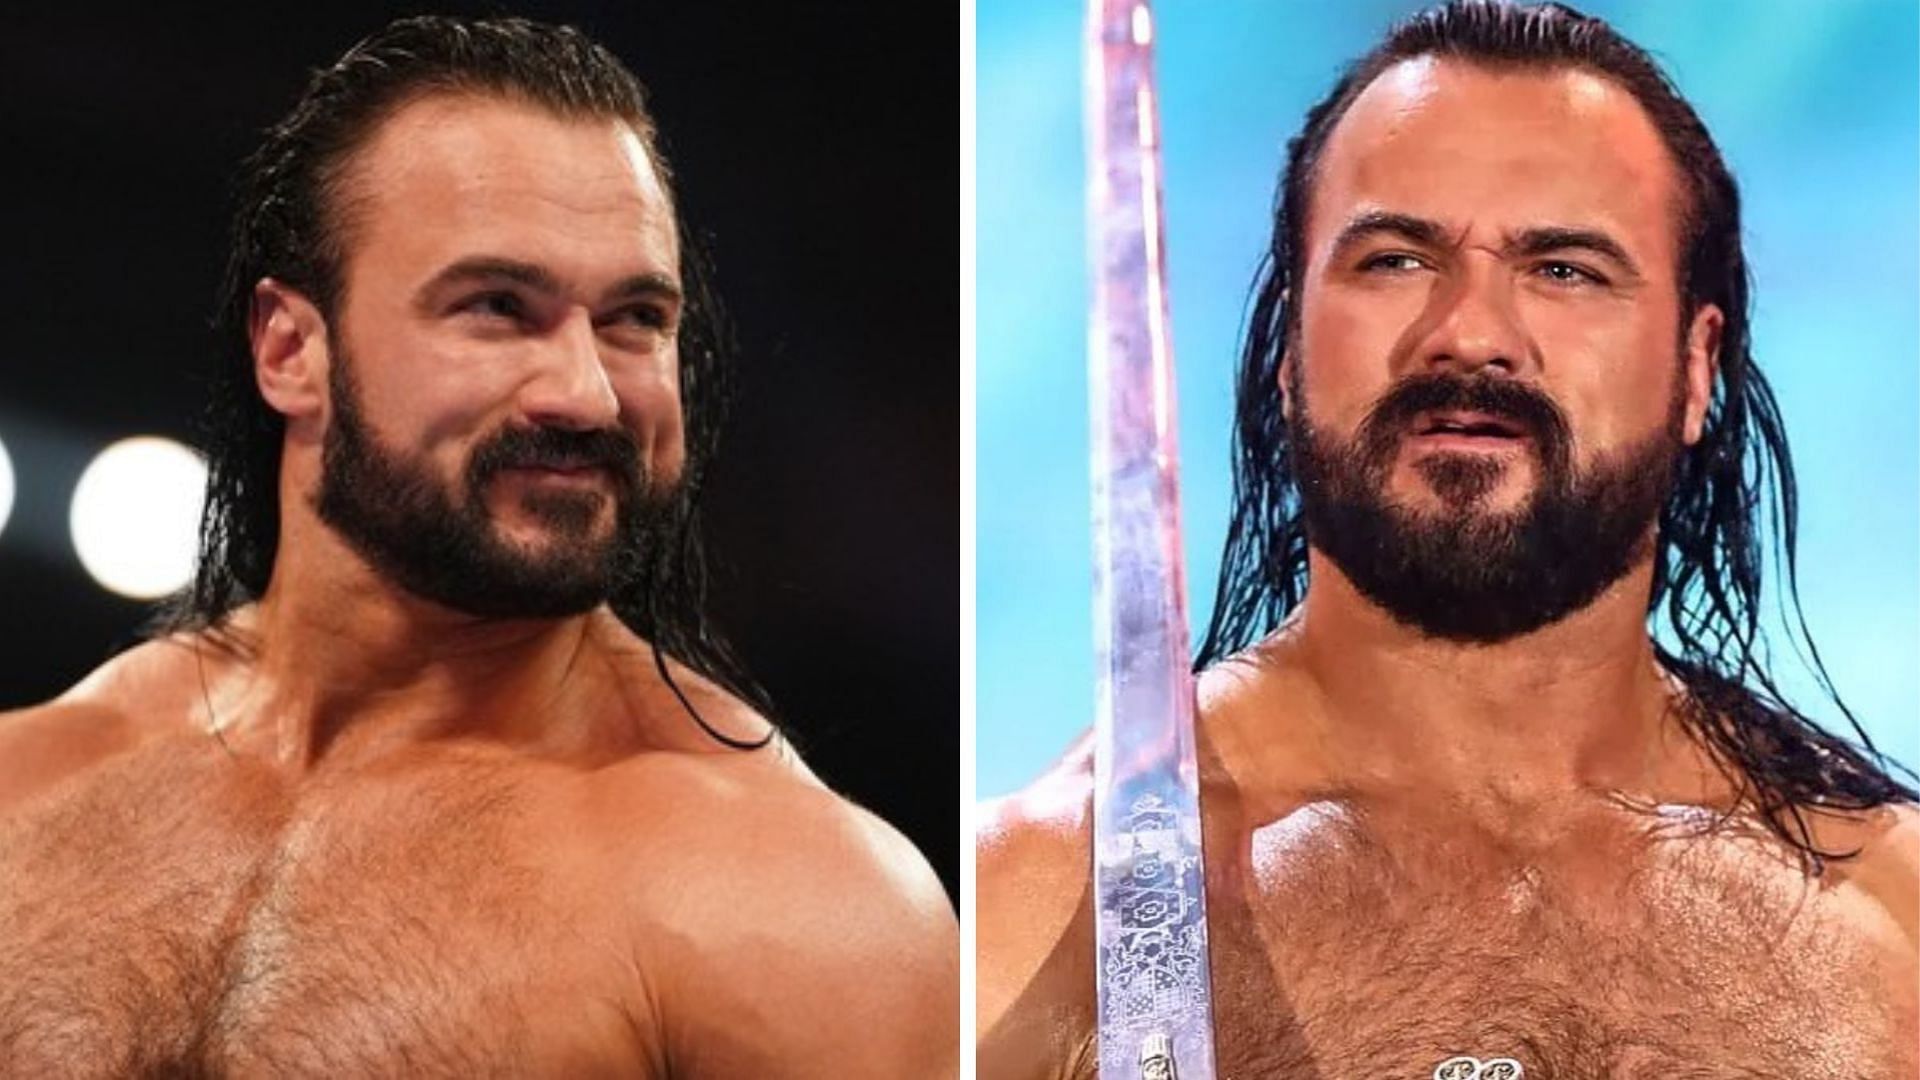 Drew McIntyre has aligned with The Brawling Brutes ahead of WWE Survivor Series. 